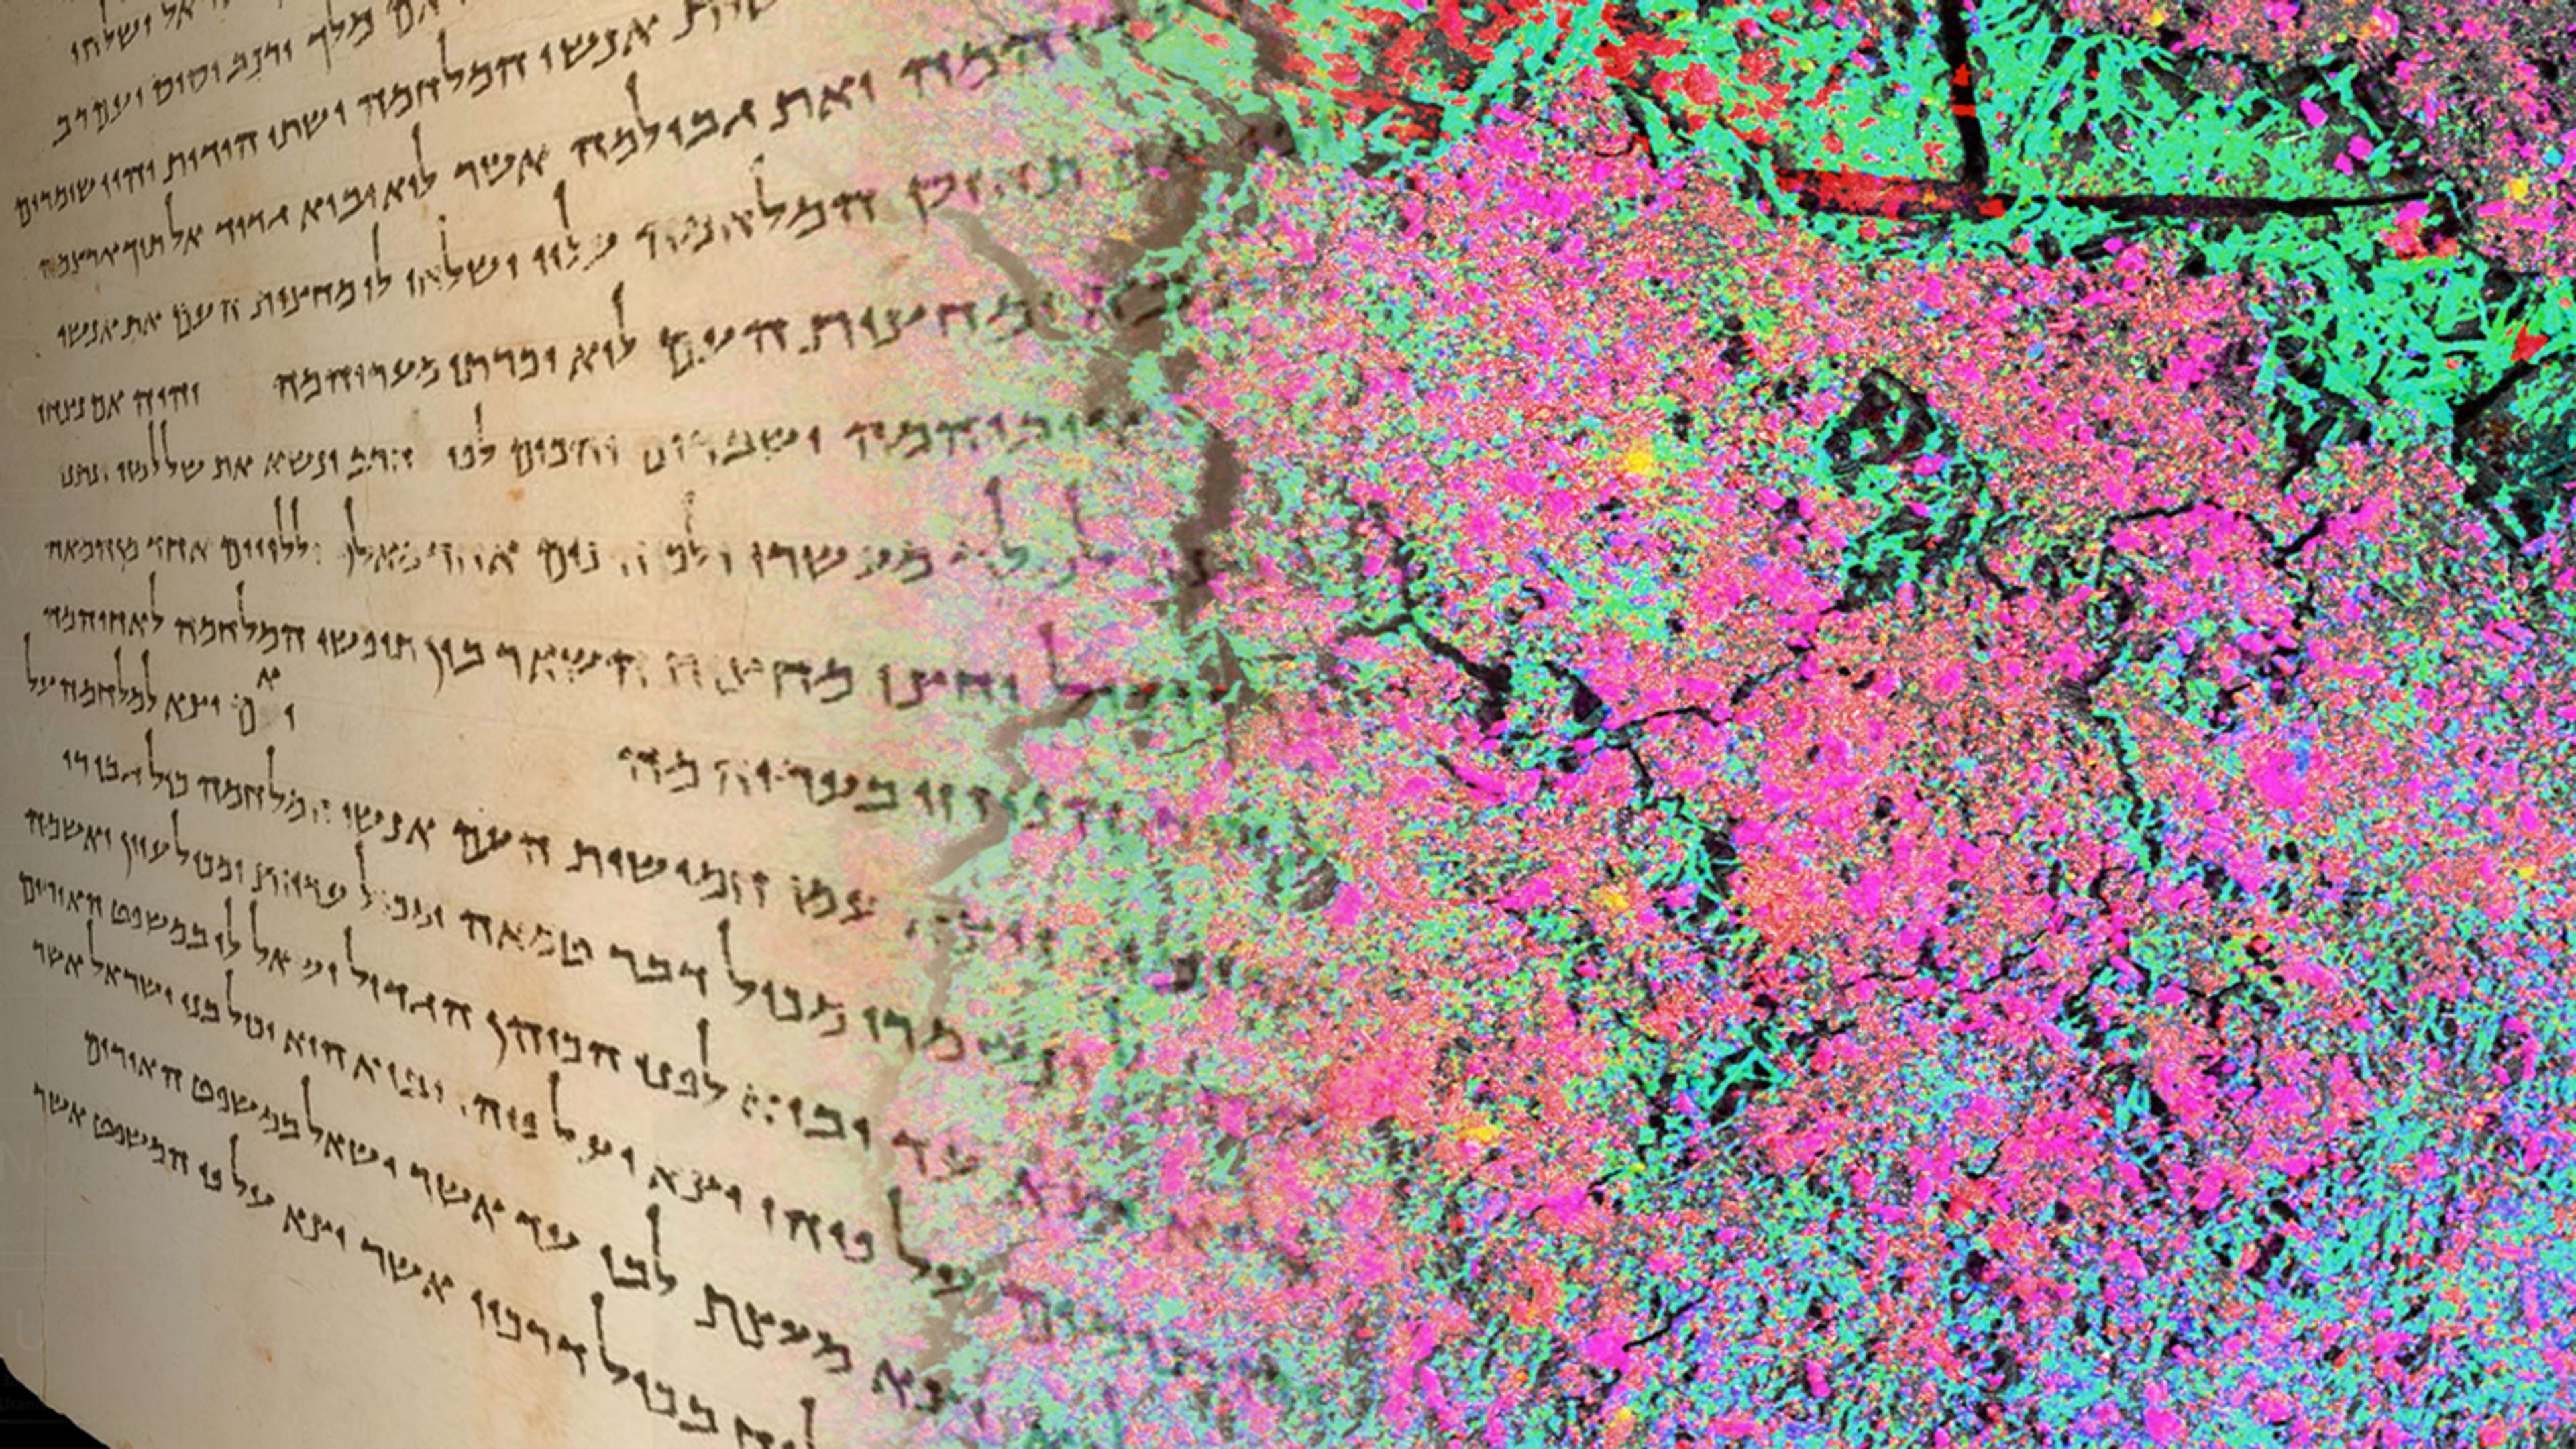 The books of today have nothing on the scrolls of 2,300 years ago